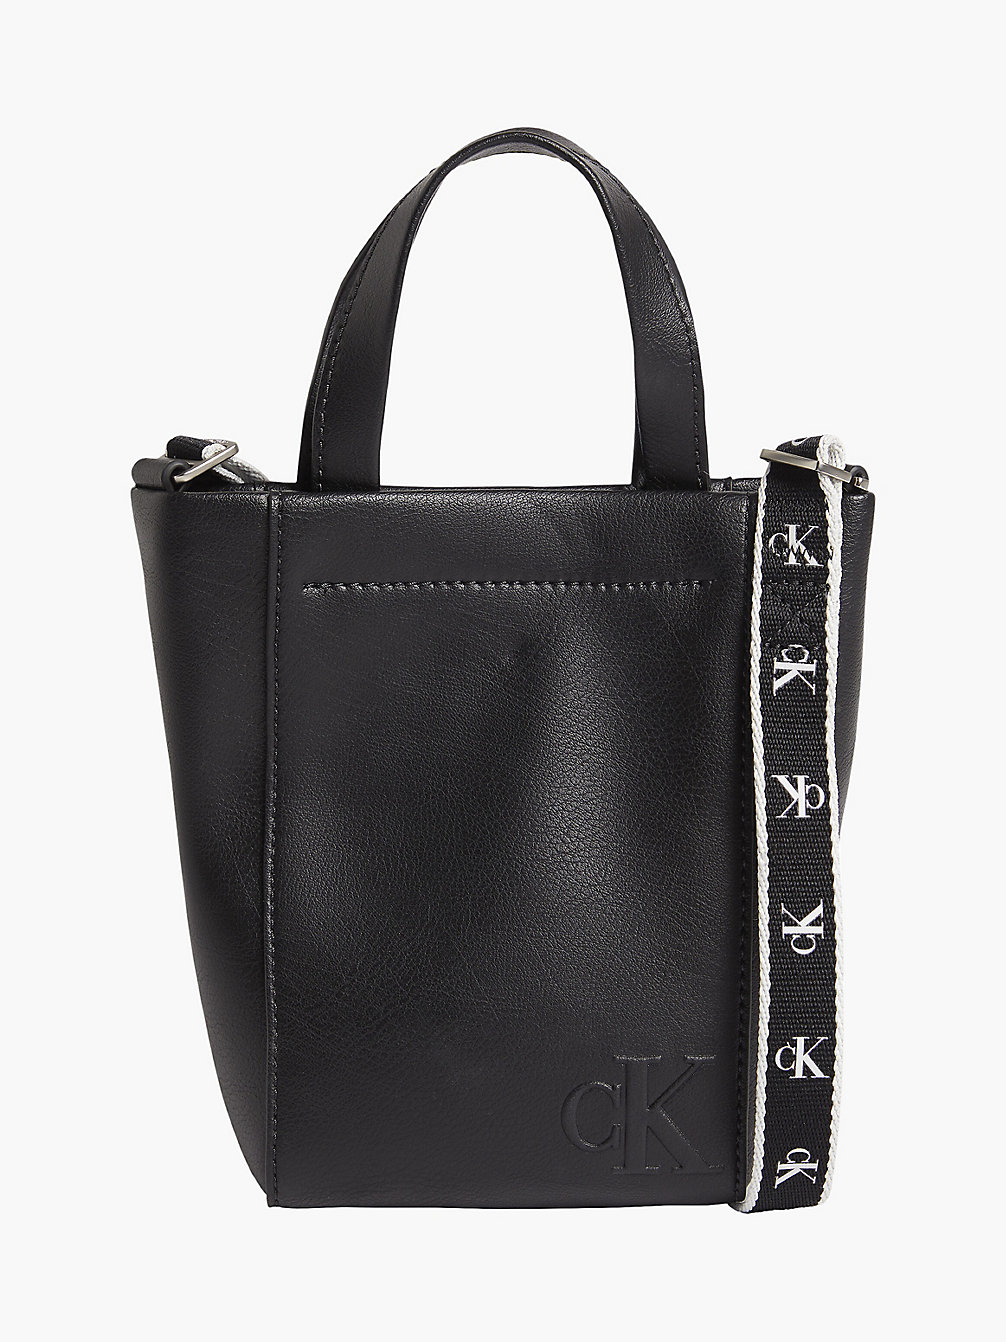 BLACK Small Recycled Tote Bag undefined women Calvin Klein